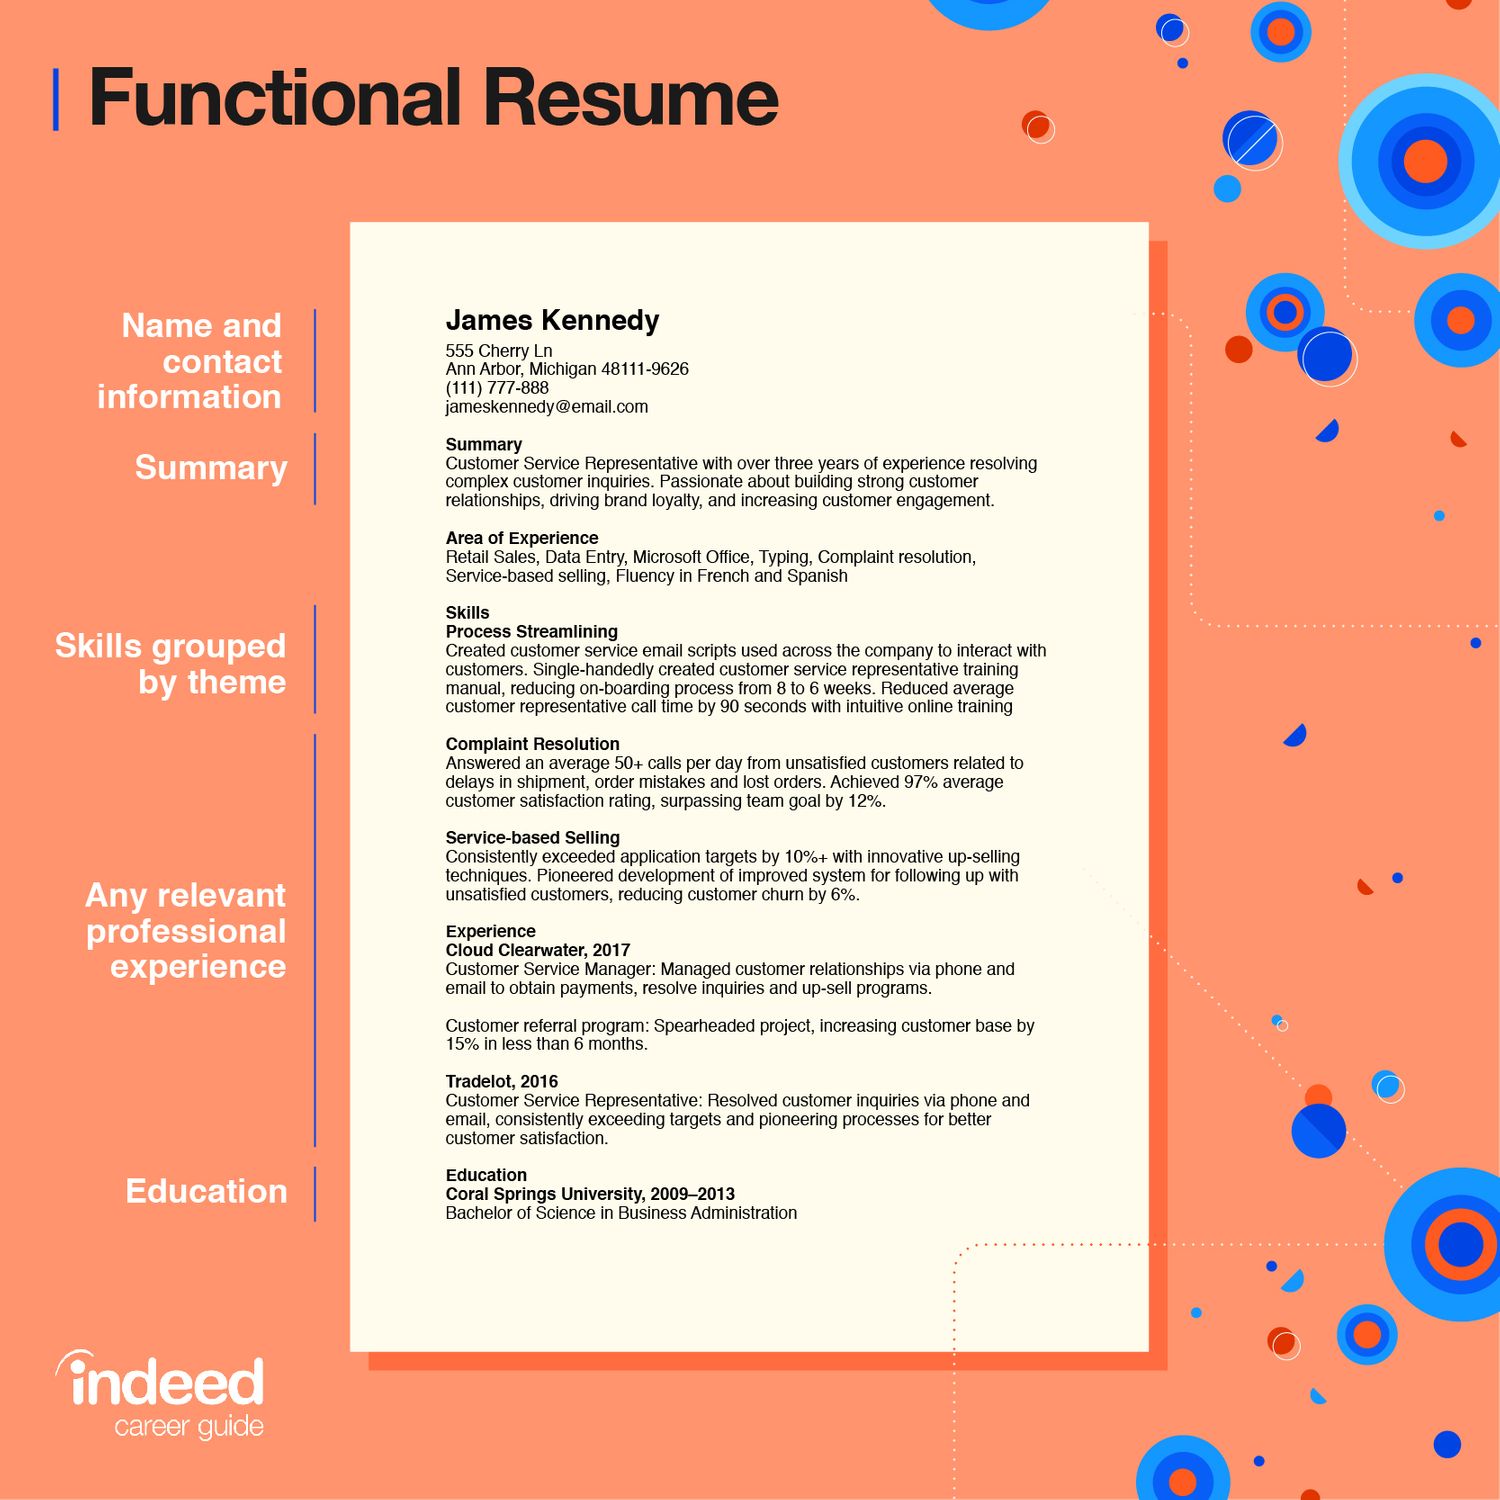 9 Ridiculous Rules About resume